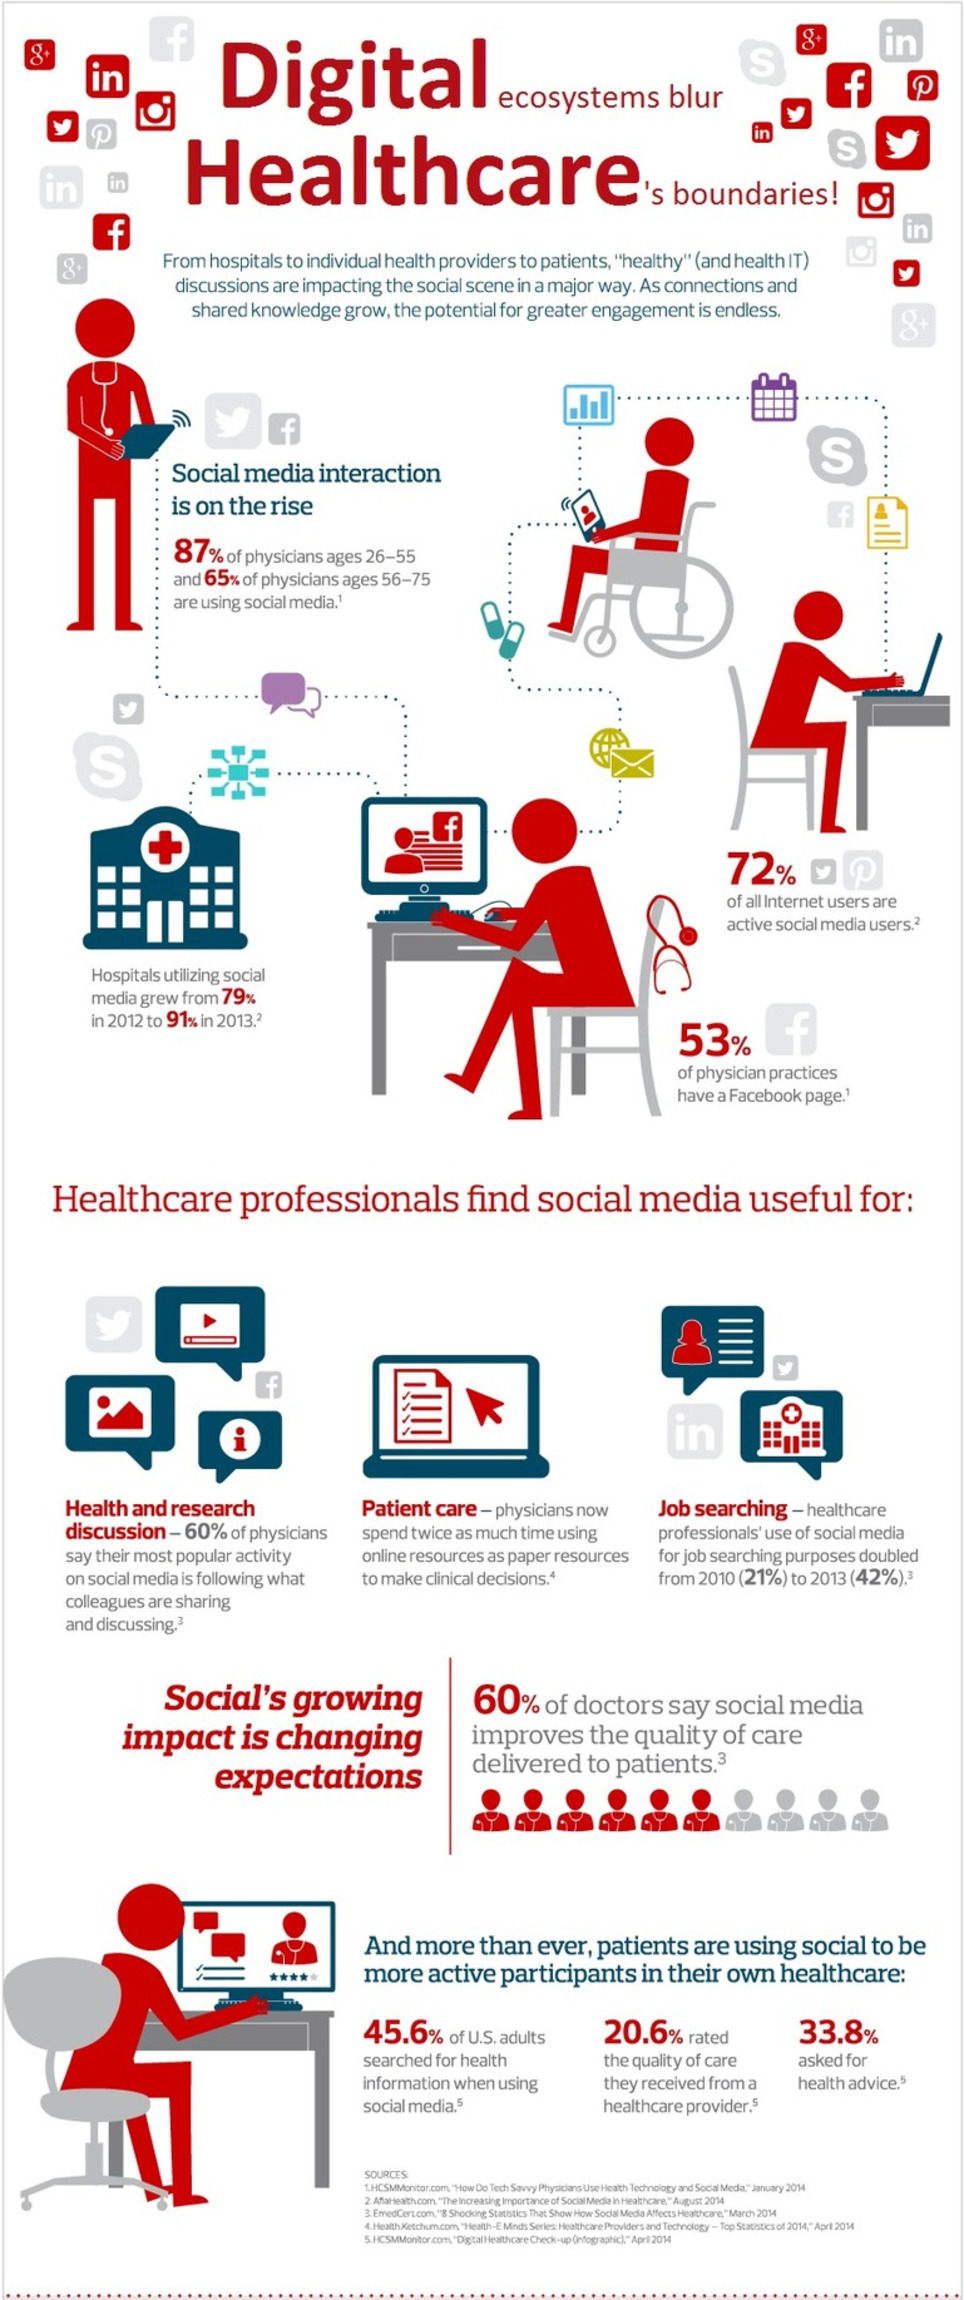 Why Do Healthcare Professionals Find Social Media Useful? | Social Health on line | Scoop.it